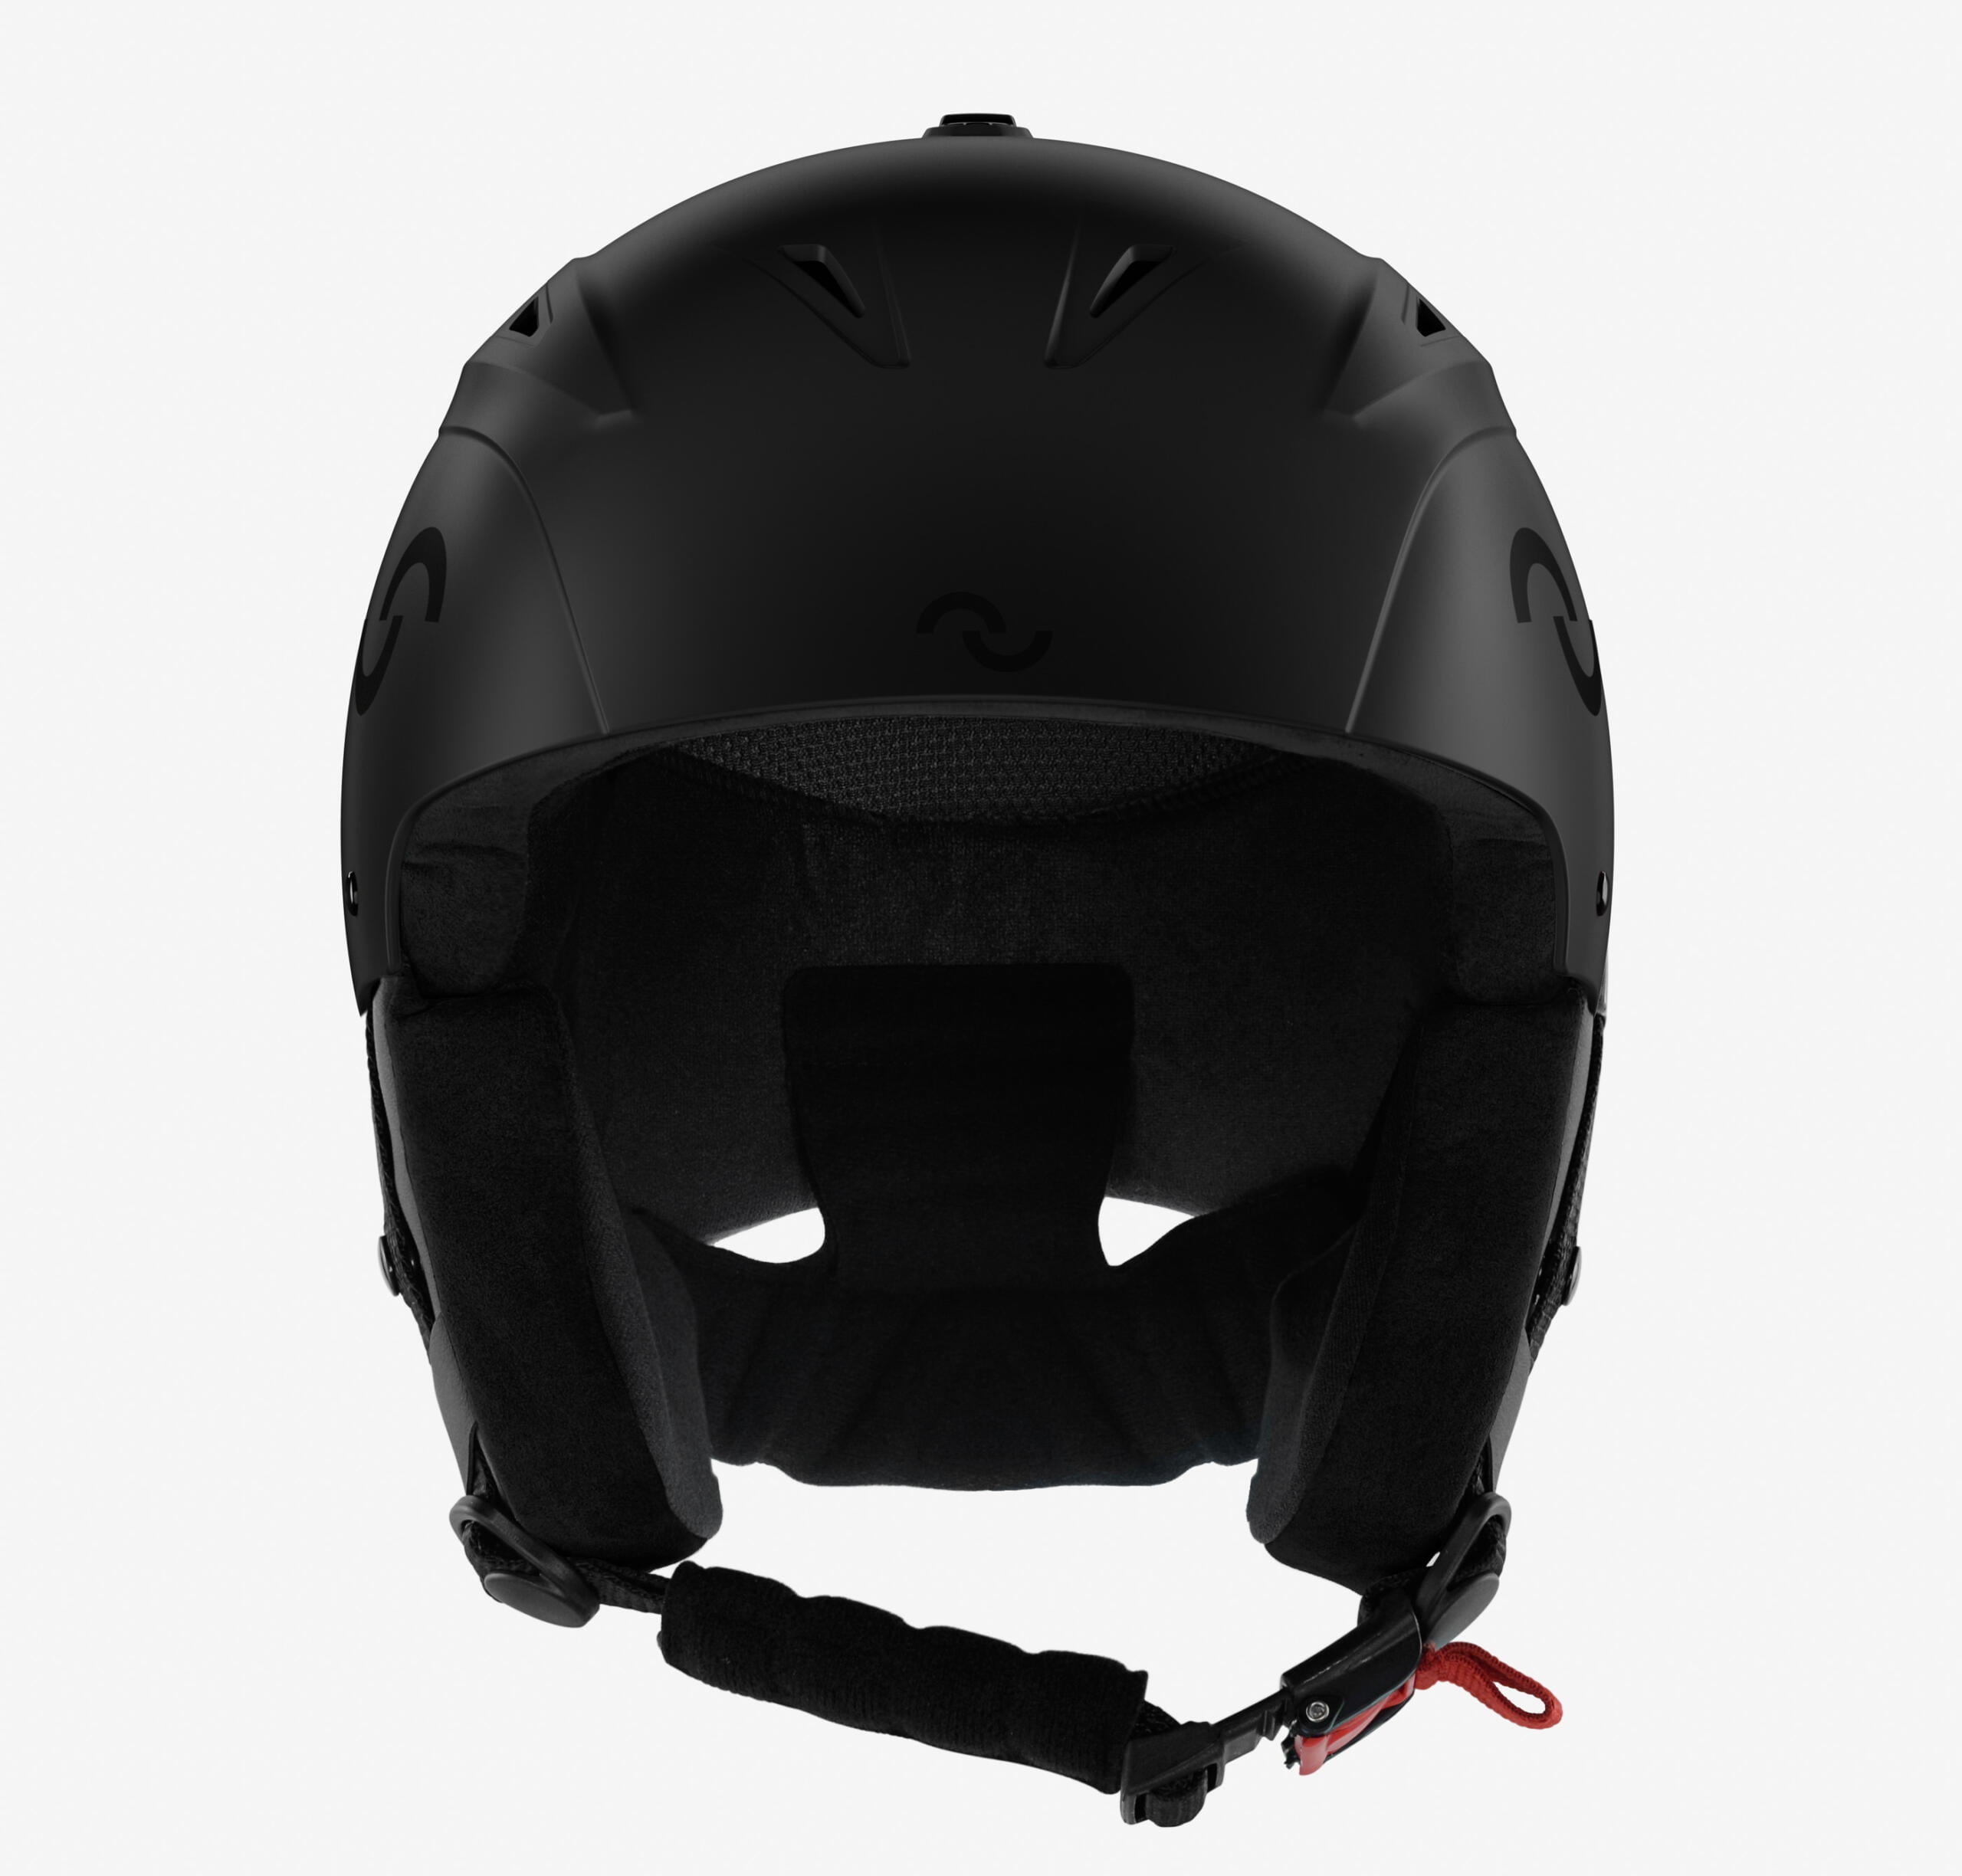 Zerokay Black Edition luxury ski helmet in black with black padding, featuring a matte finish and offering superior comfort and certified safety features.